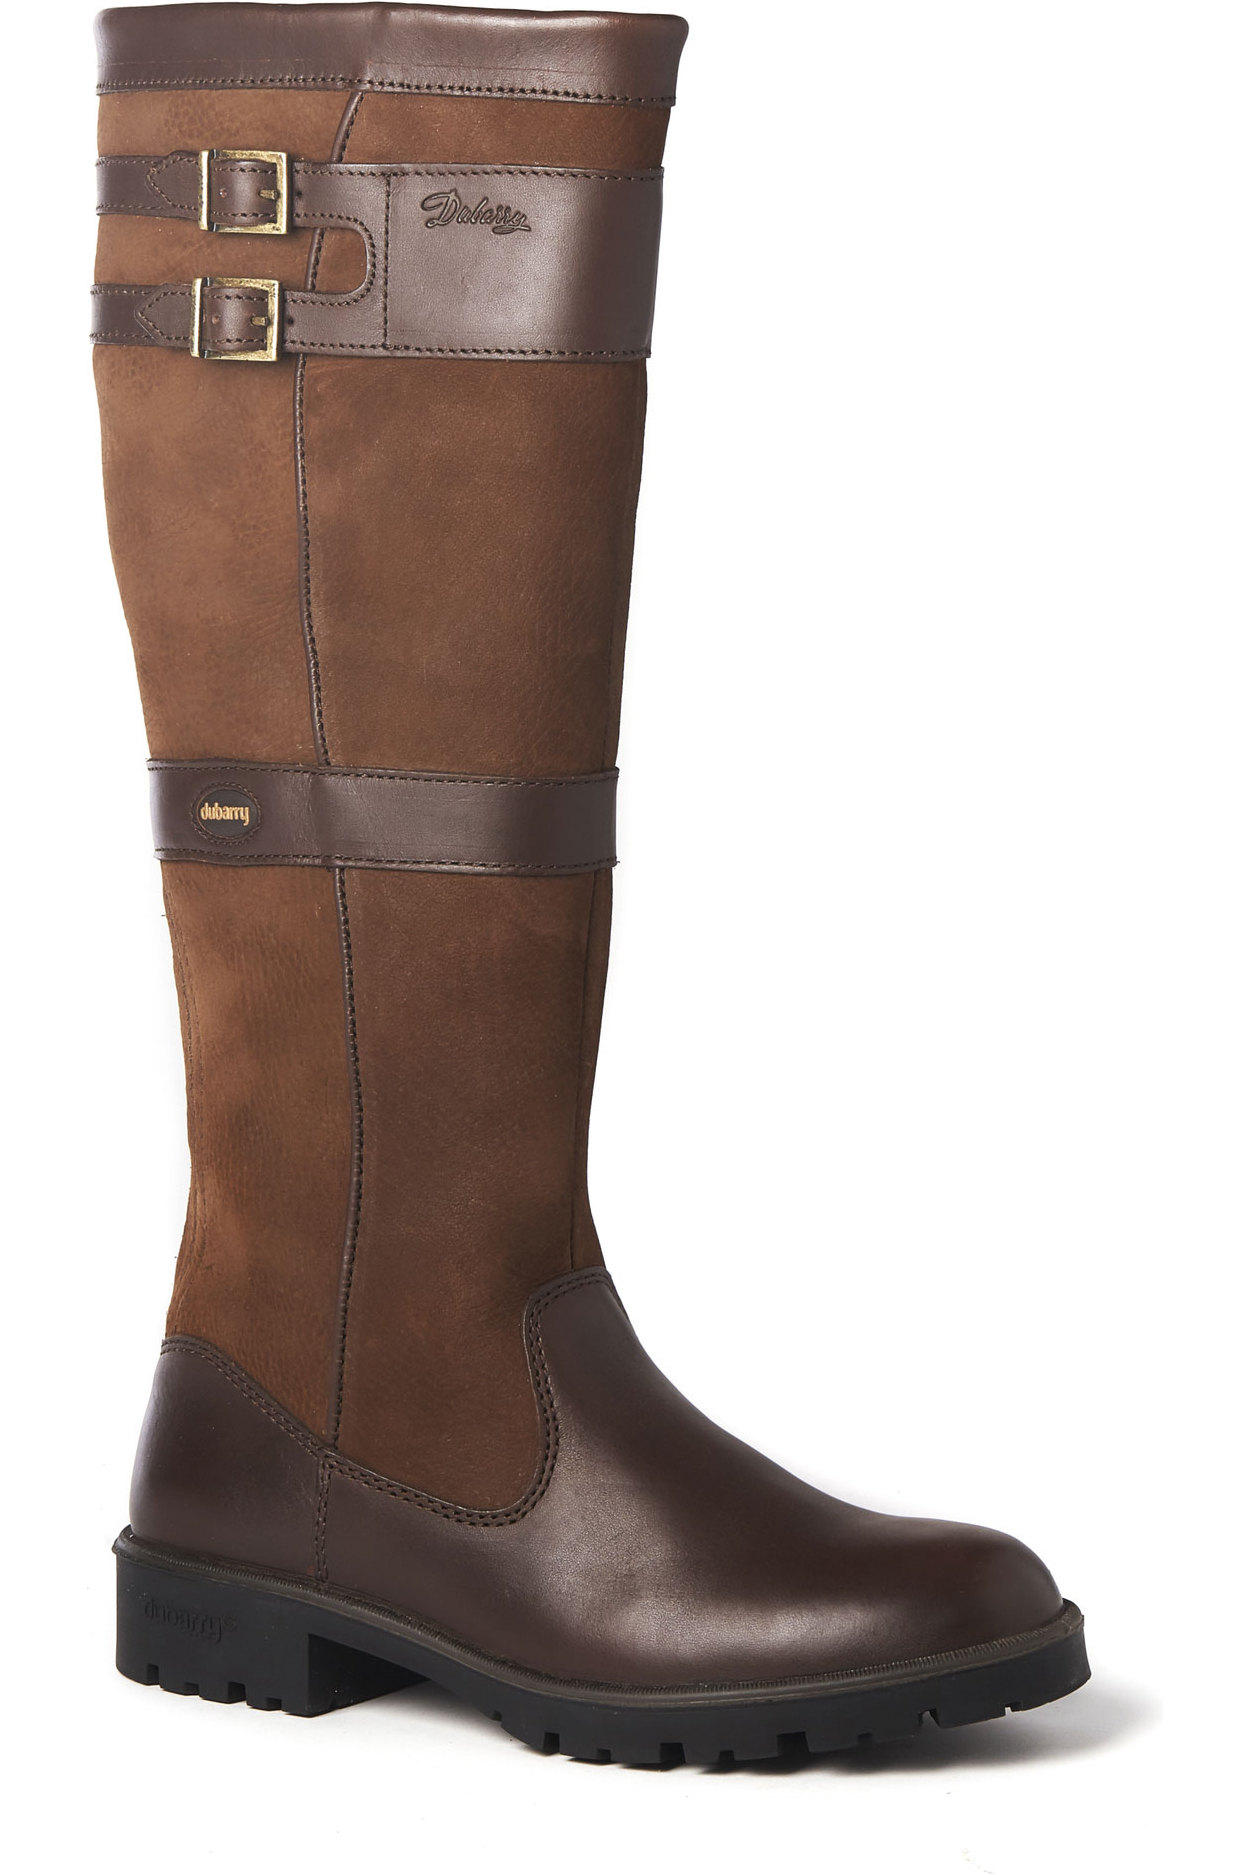 Dubarry Womens Longford Leather Boot - Walnut | The Drillshed